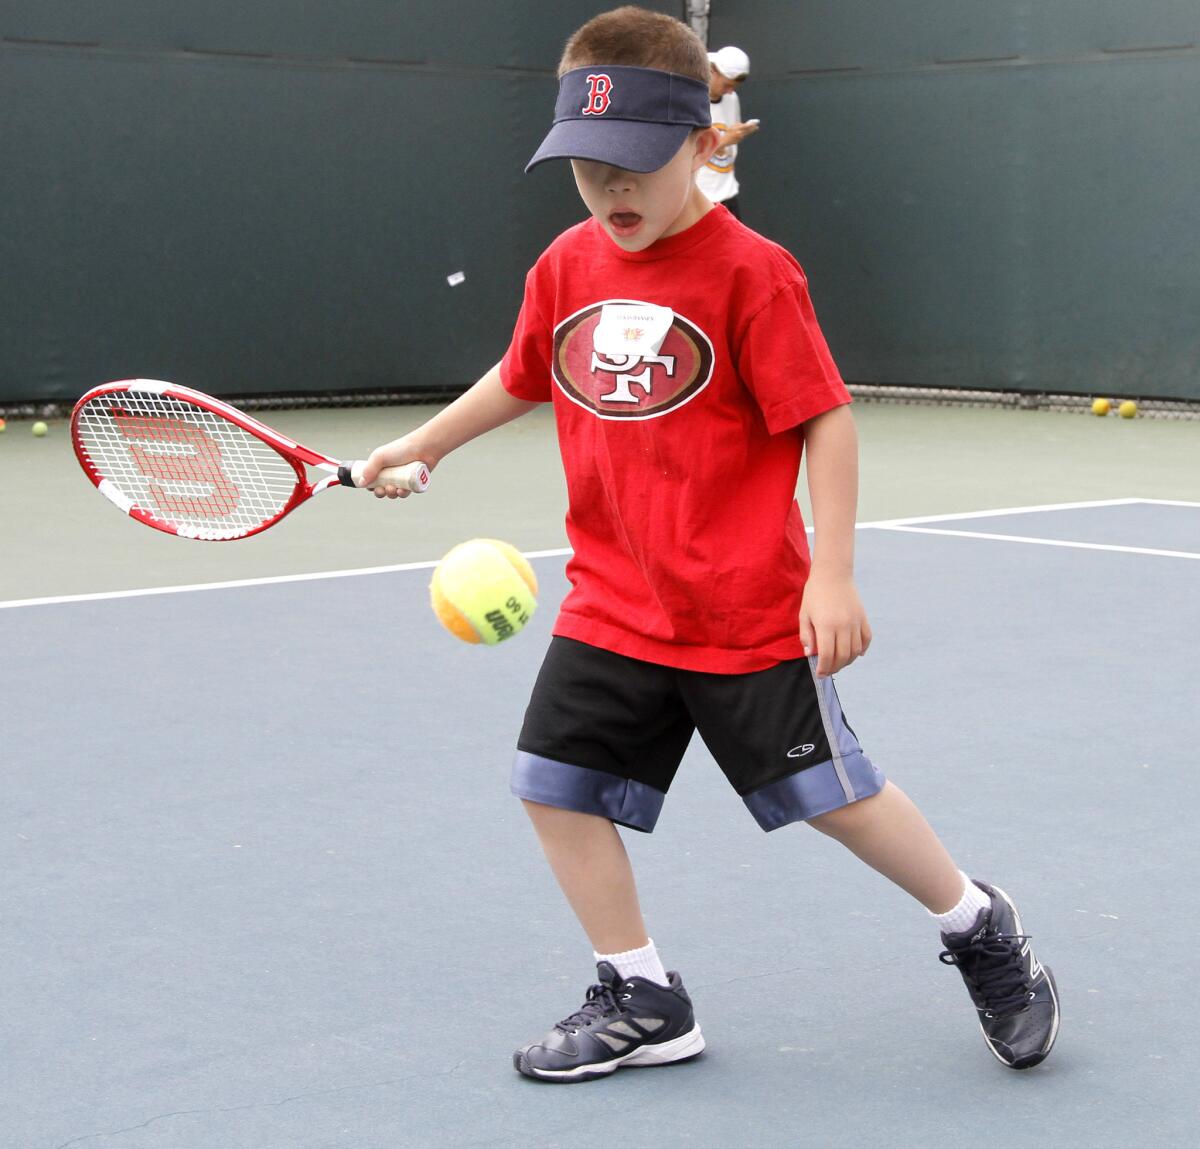 Eight-year old Lukas Hansen plays tennis during the annual Jensen-Schmidt Tennis Academy for Special Needs Individuals at the Burbank Tennis Center in Burbank on Wednesday, June 25, 2014.